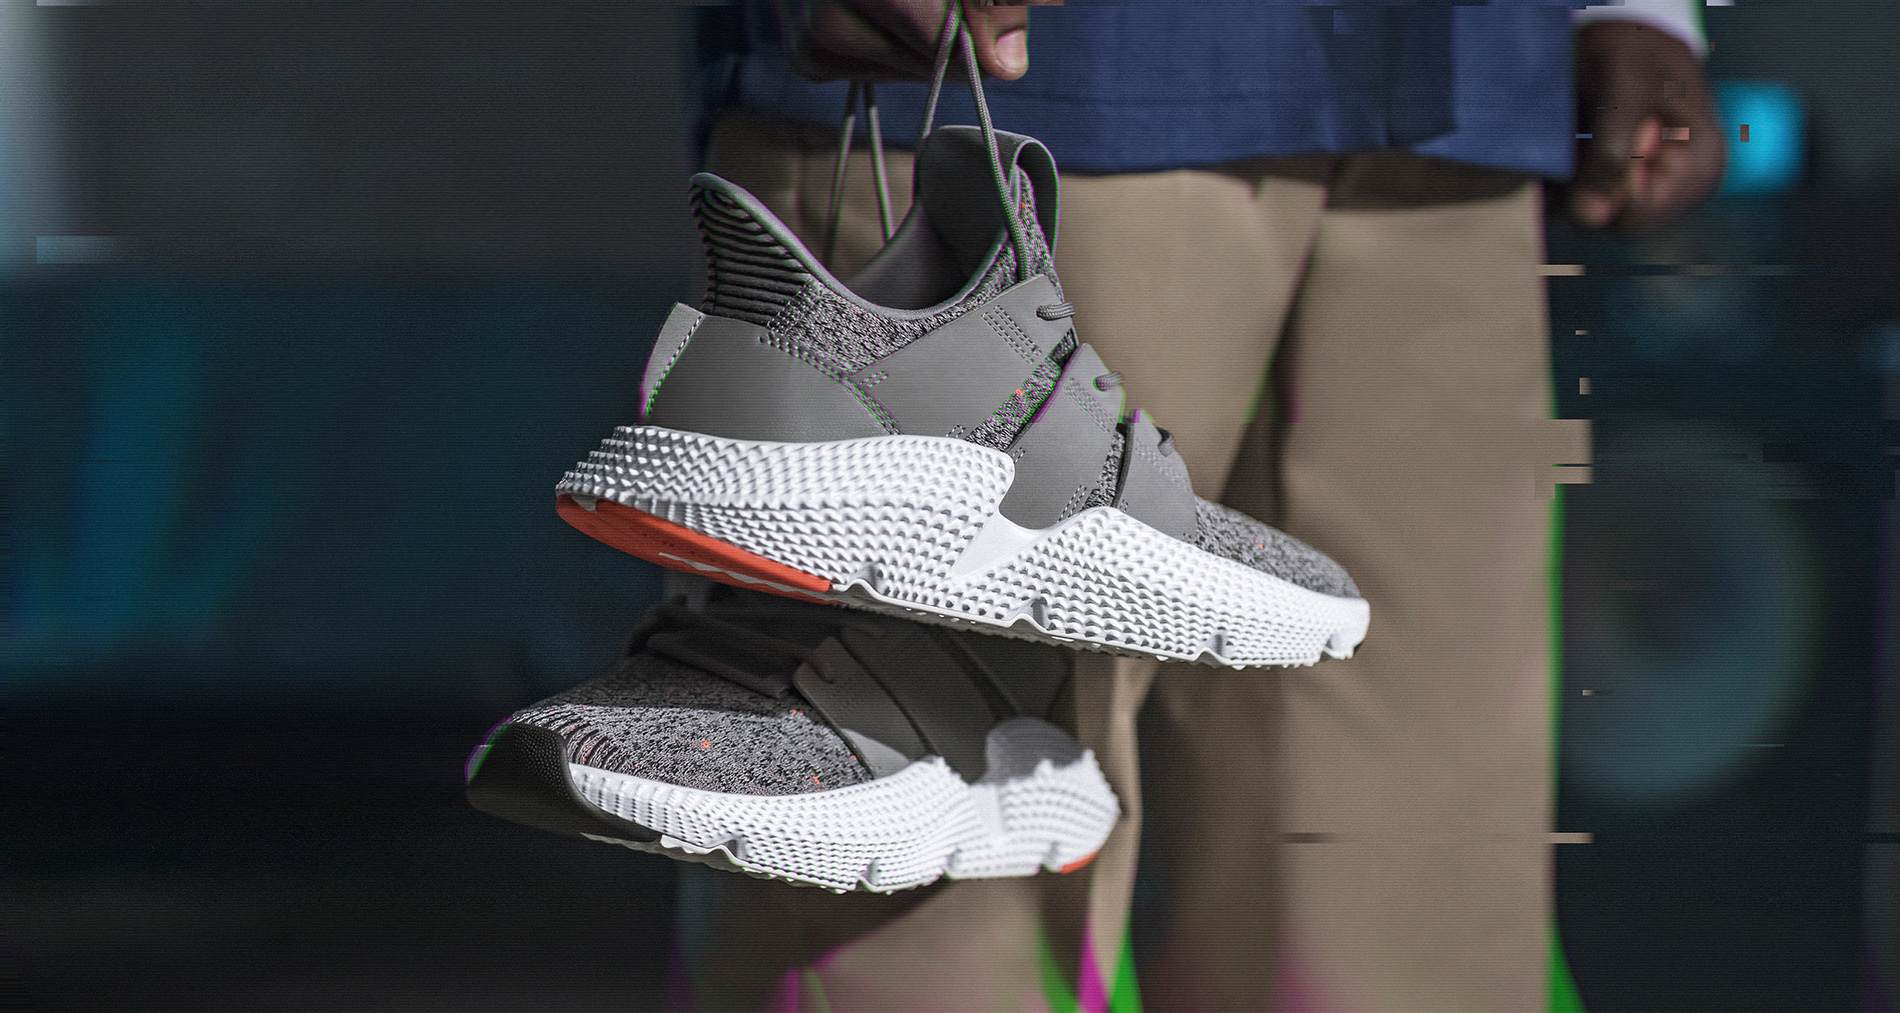 adidas Prophere "Refill" Pack